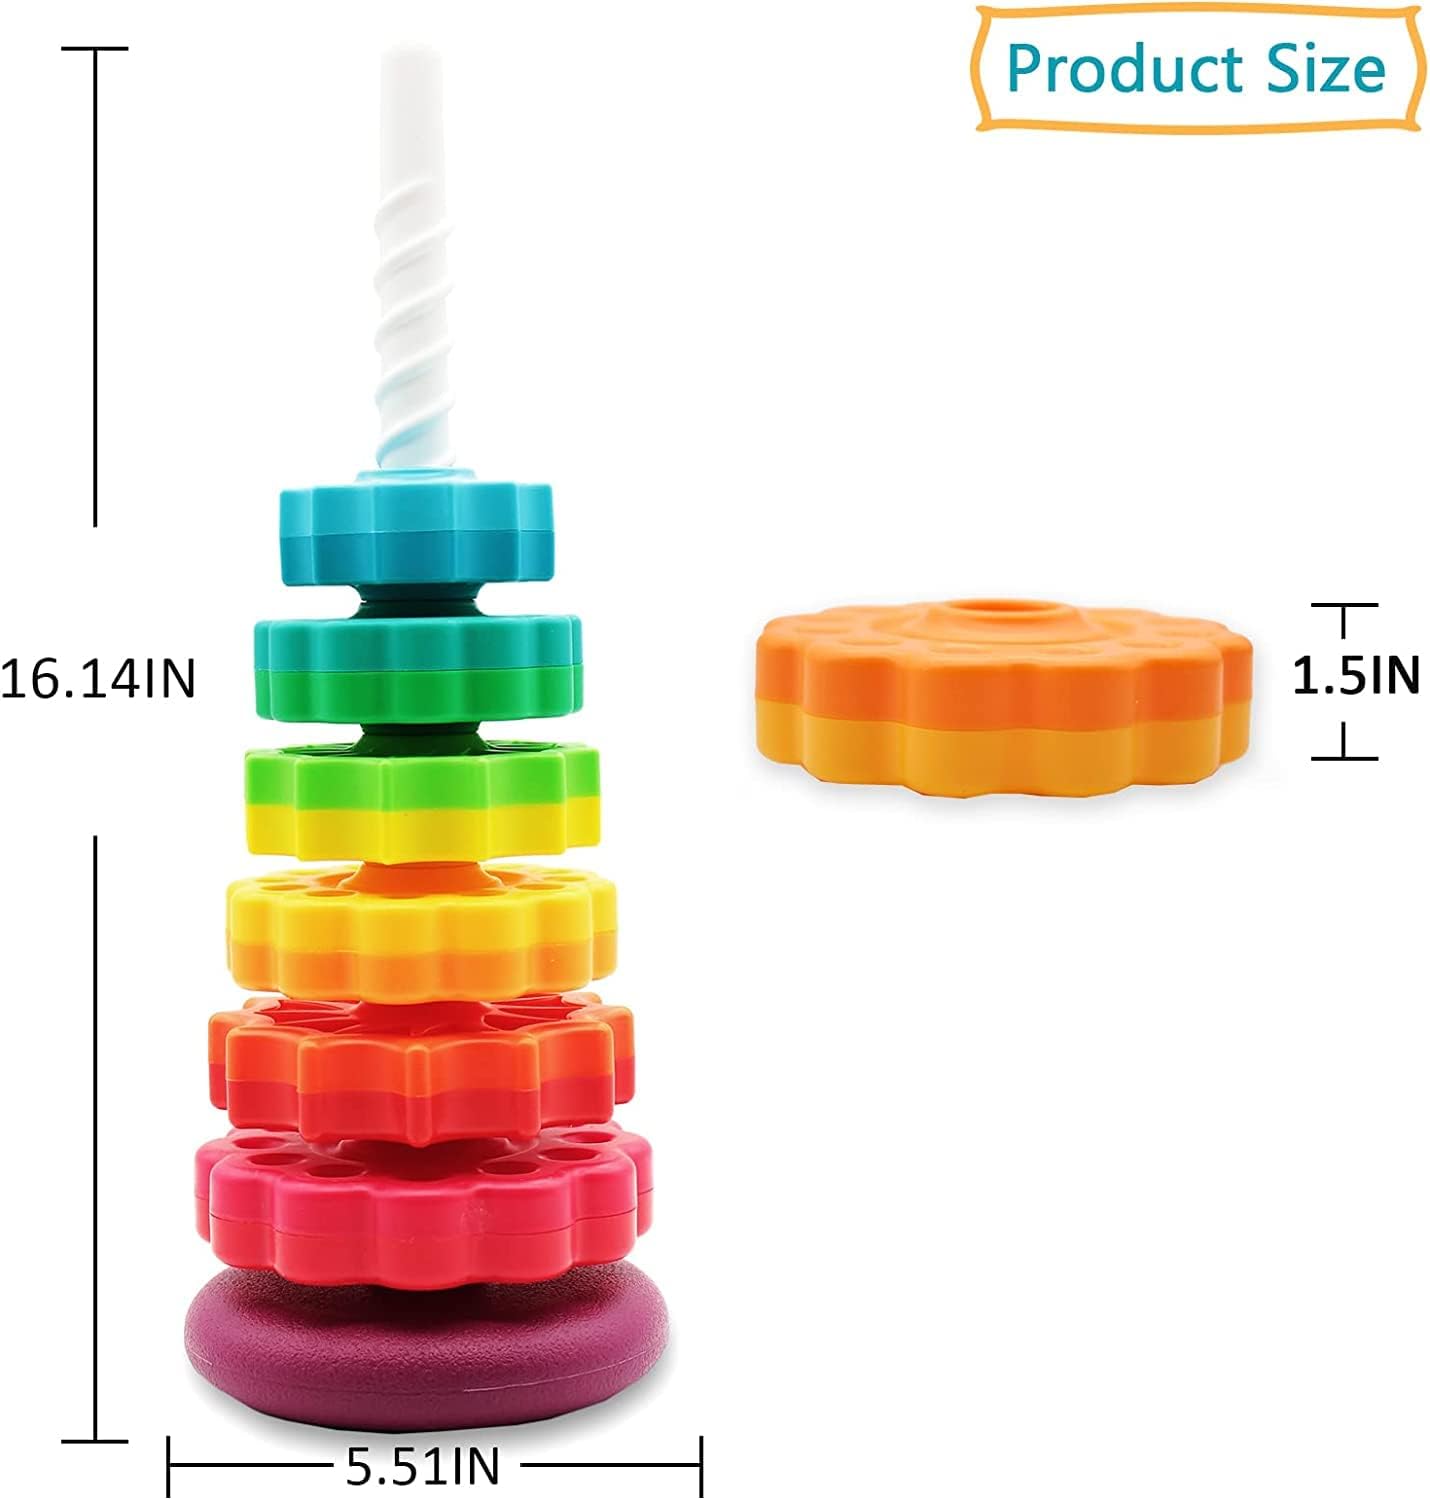 XICEN Spinning Stacking Toys,Spin Toys ABS Plastic Design,Focus on Children Educational and Interactive Learning's Stack Toys, Suitable for Gifts for Boys and Girls